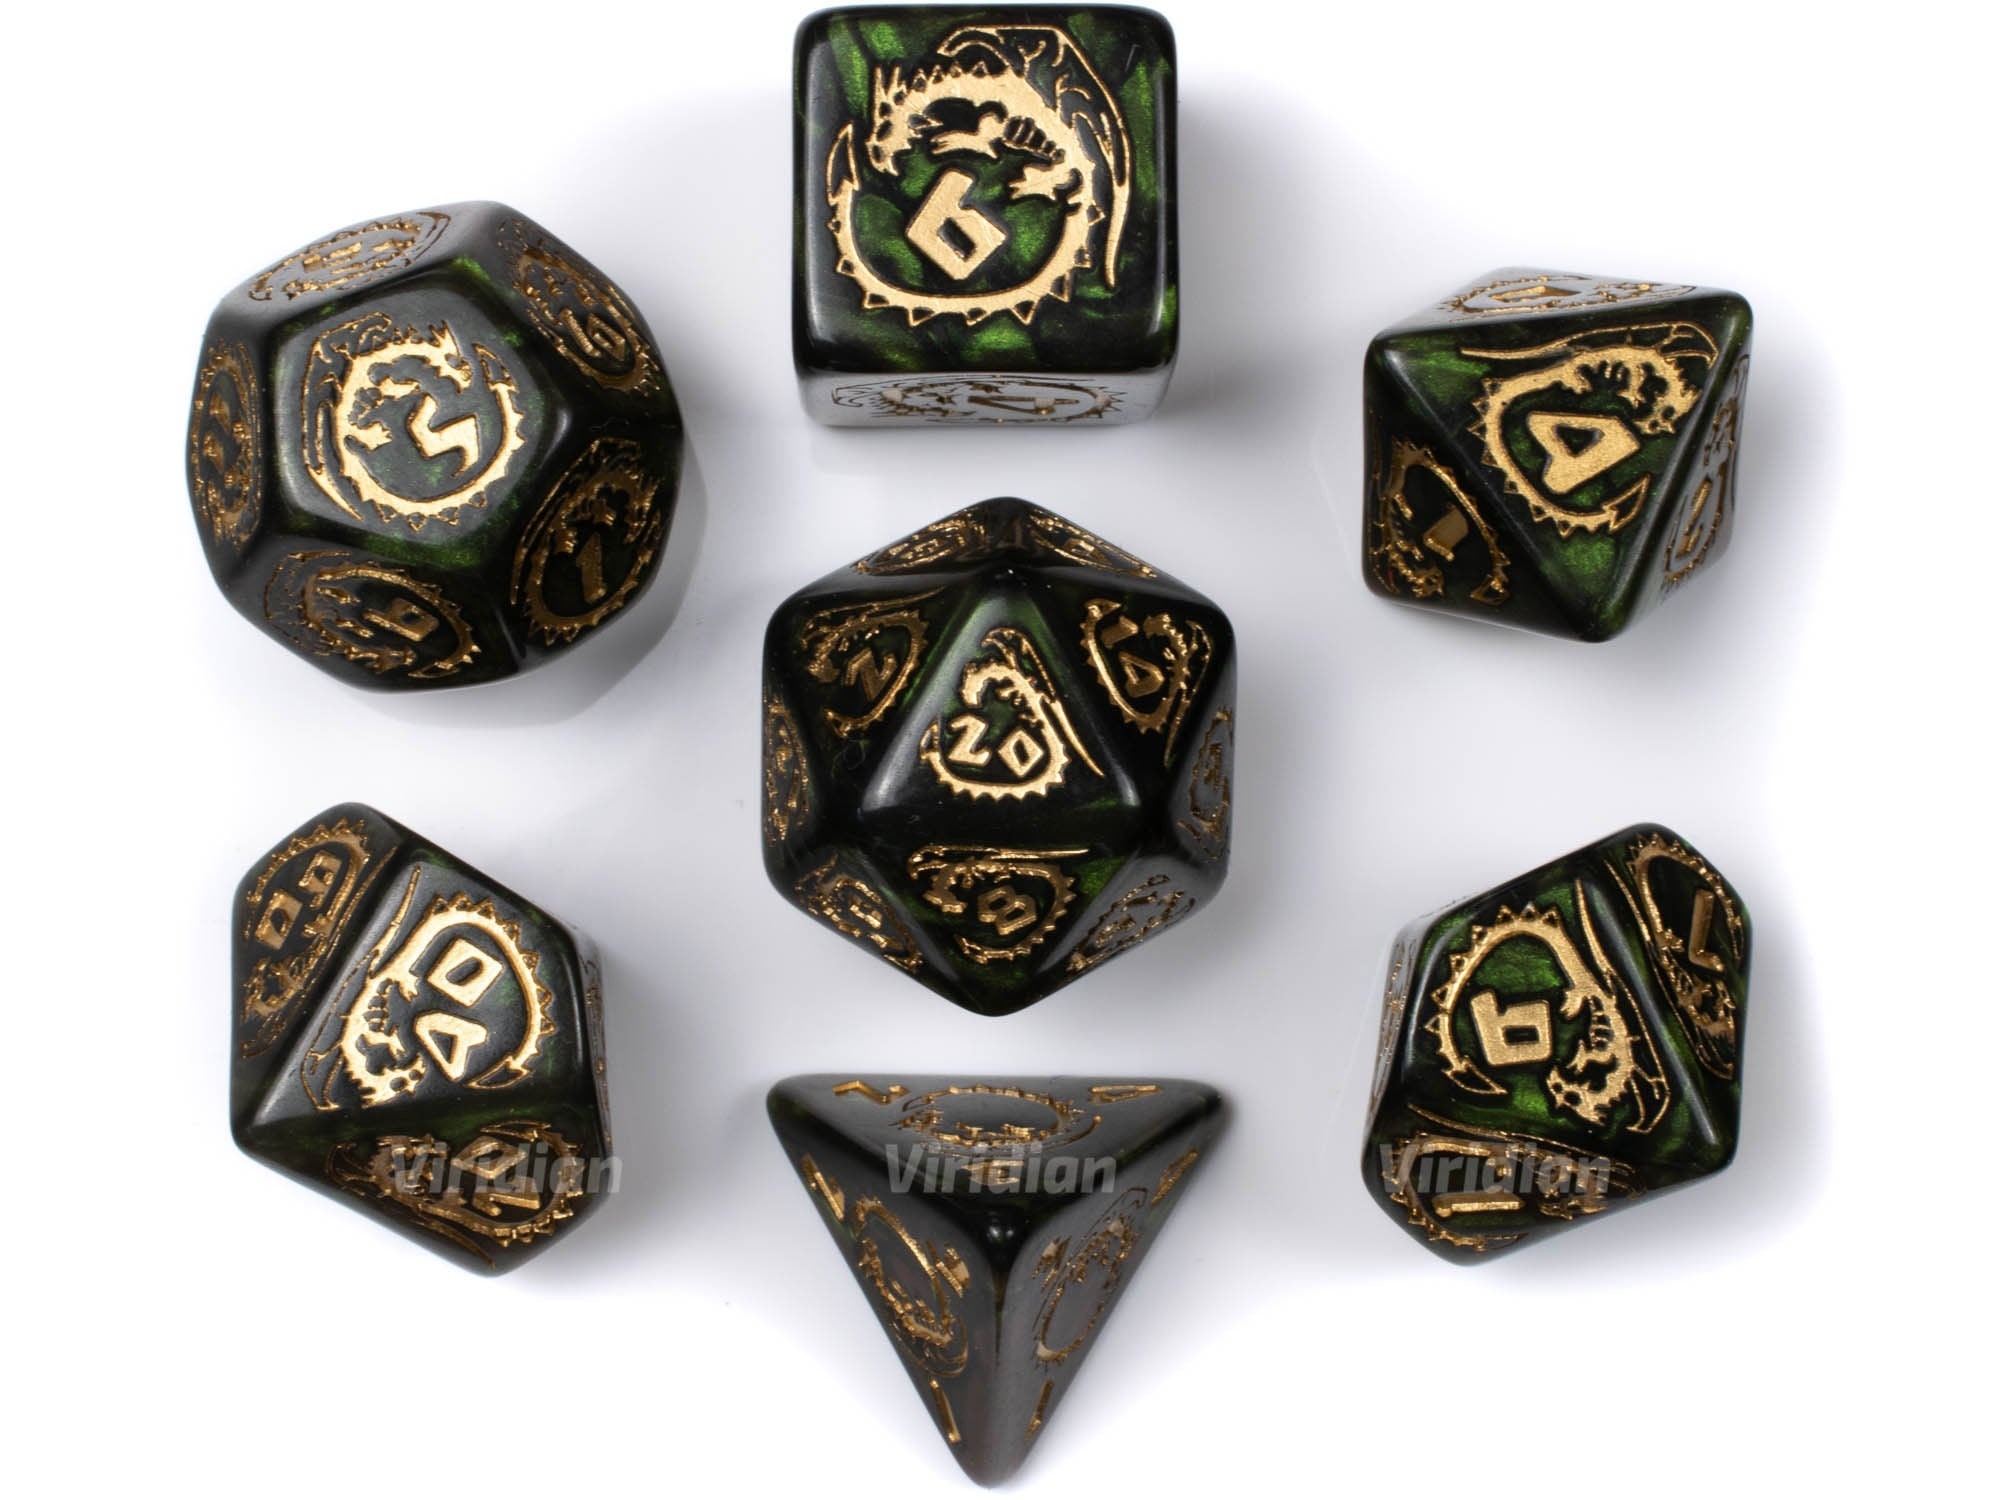 Green with White Etches Q-Workshop CG Level Counter D20 Dice 